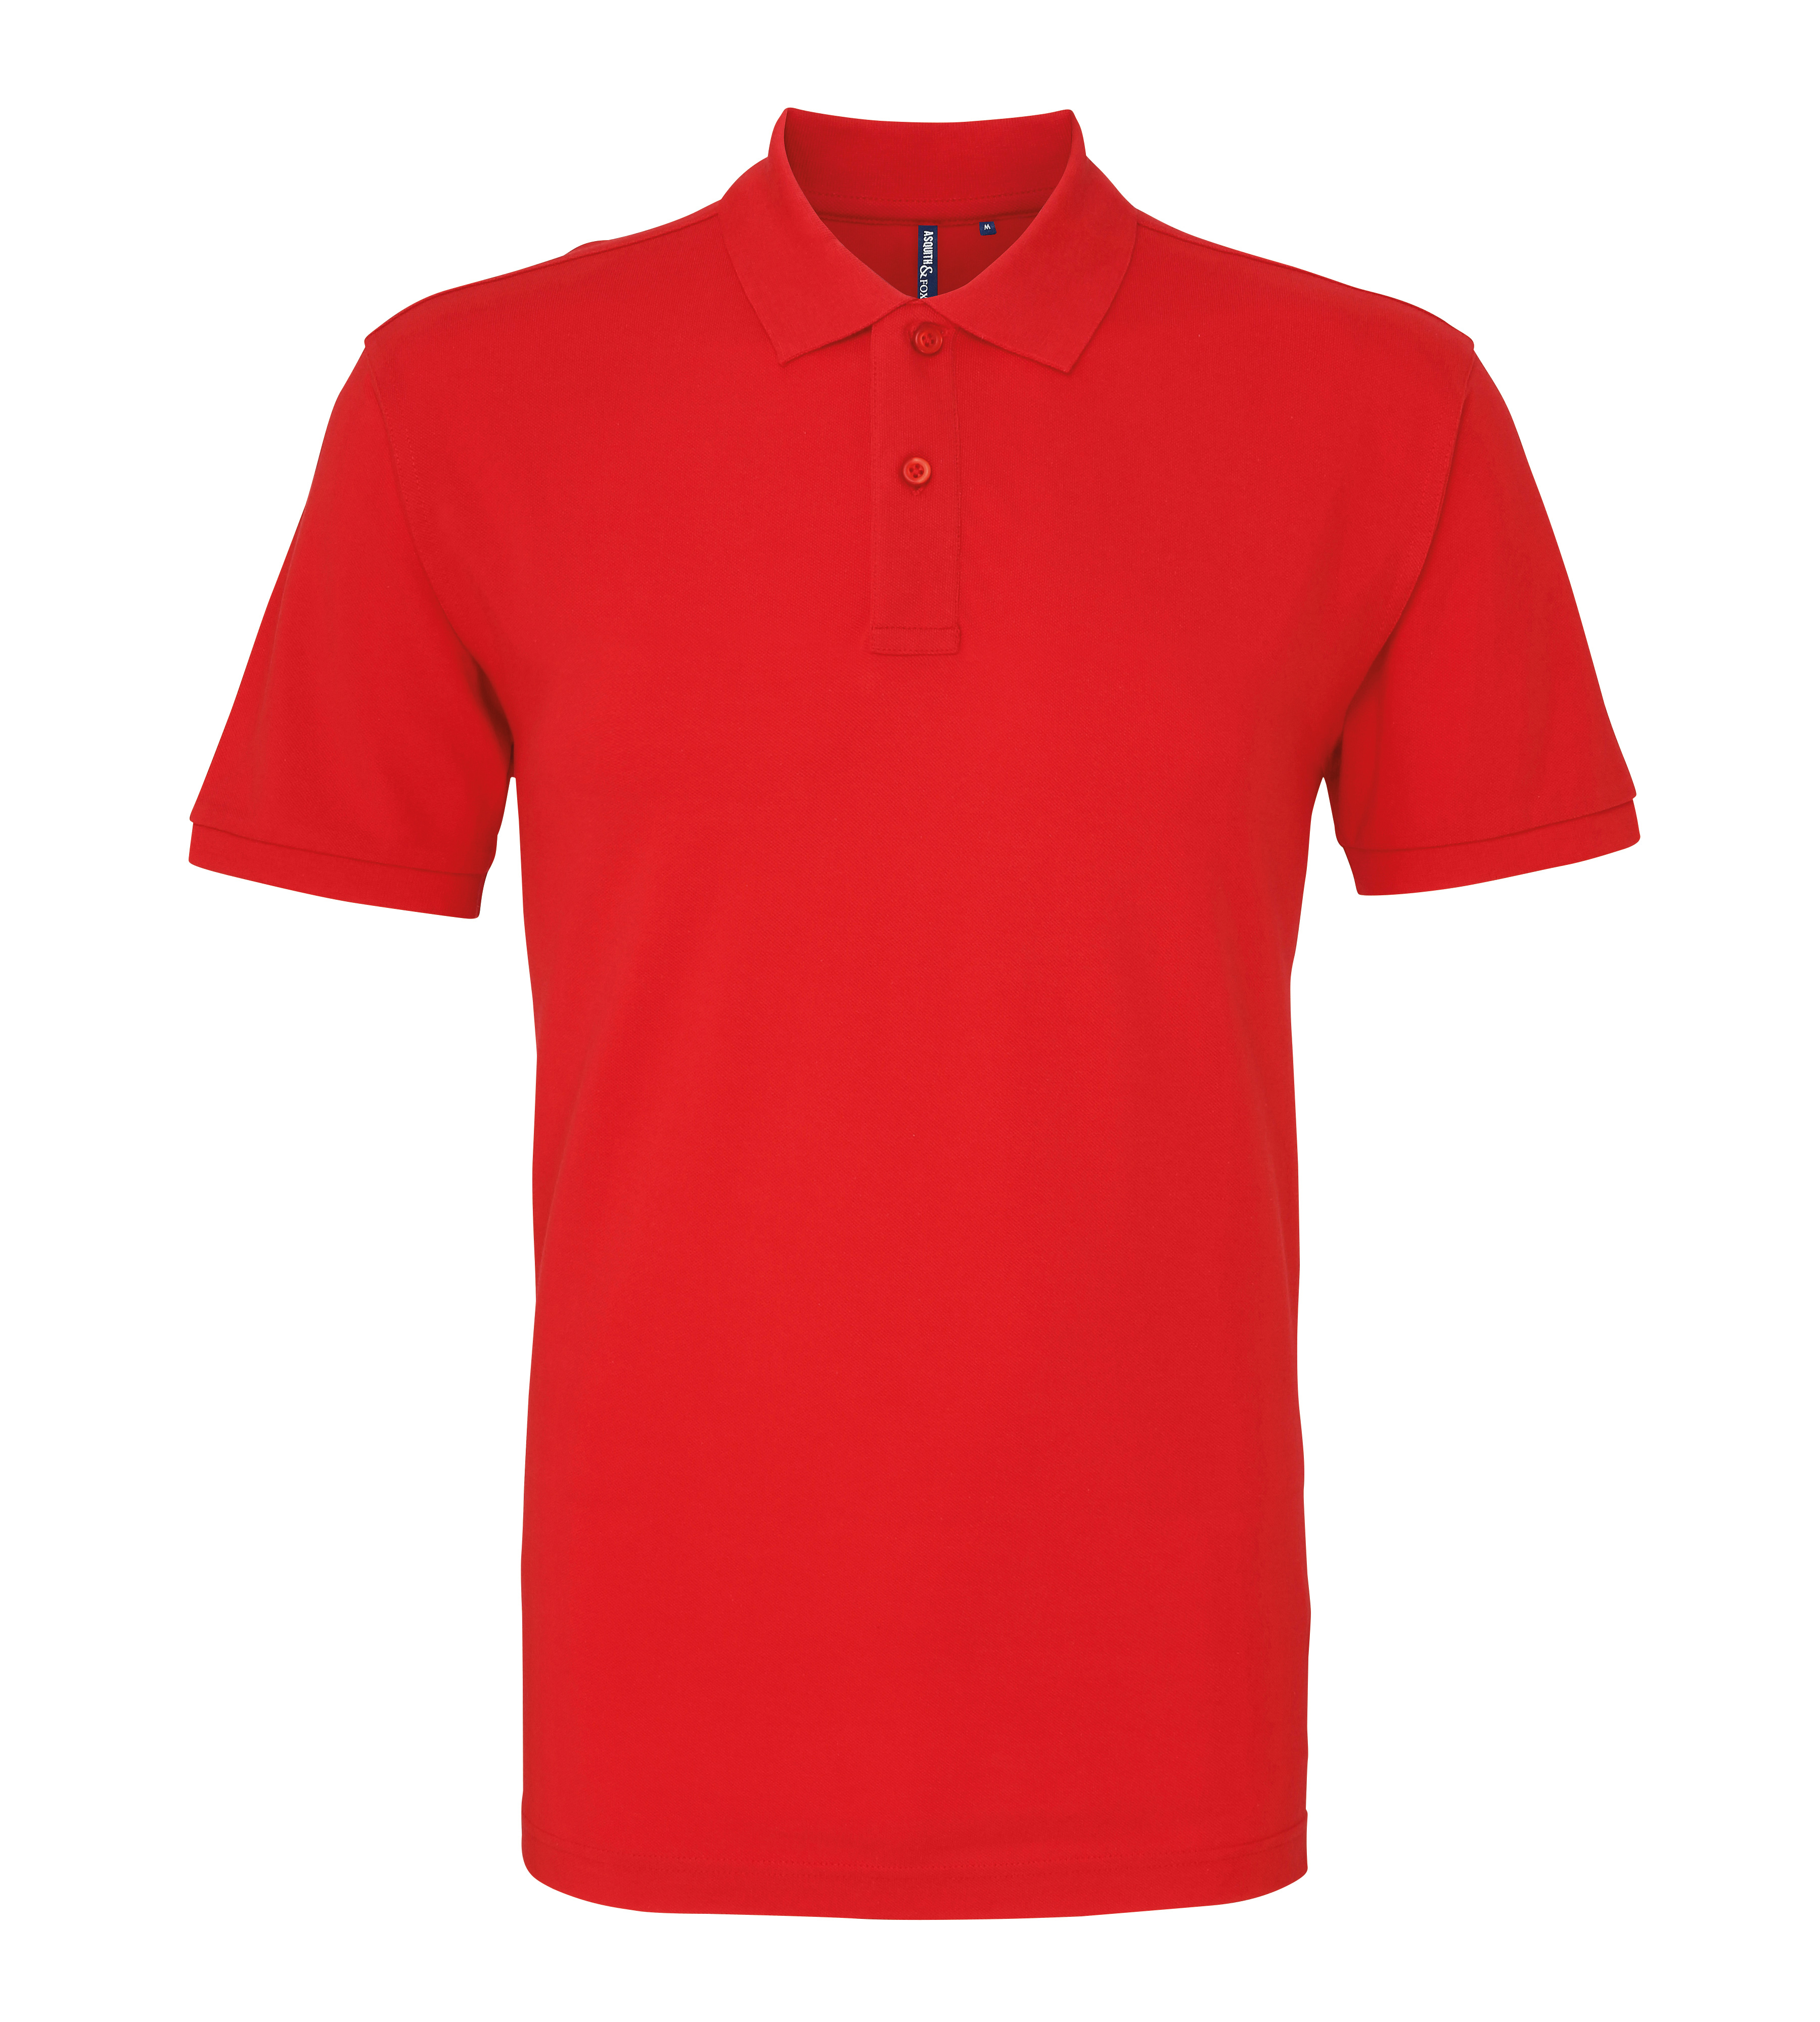 ax-httpswebsystems.s3.amazonaws.comtmp_for_downloadasquith-and-fox-men27s-polo-red.jpg